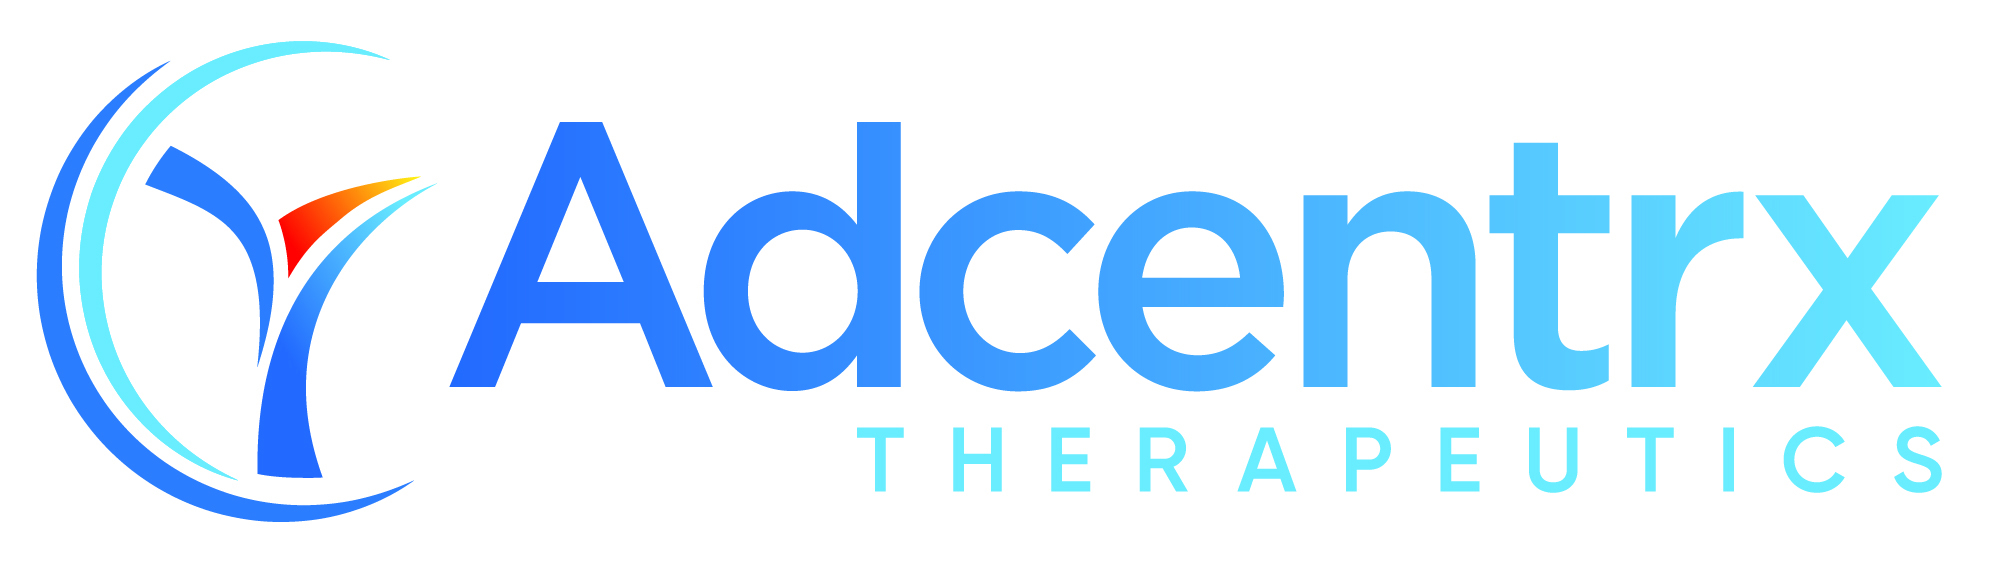 Adcentrx Therapeutics Announces China NMPA Grants IND Clearance for ADRX-0706, a Novel Nectin-4 ADC for the Treatment of Advanced Solid Tumors